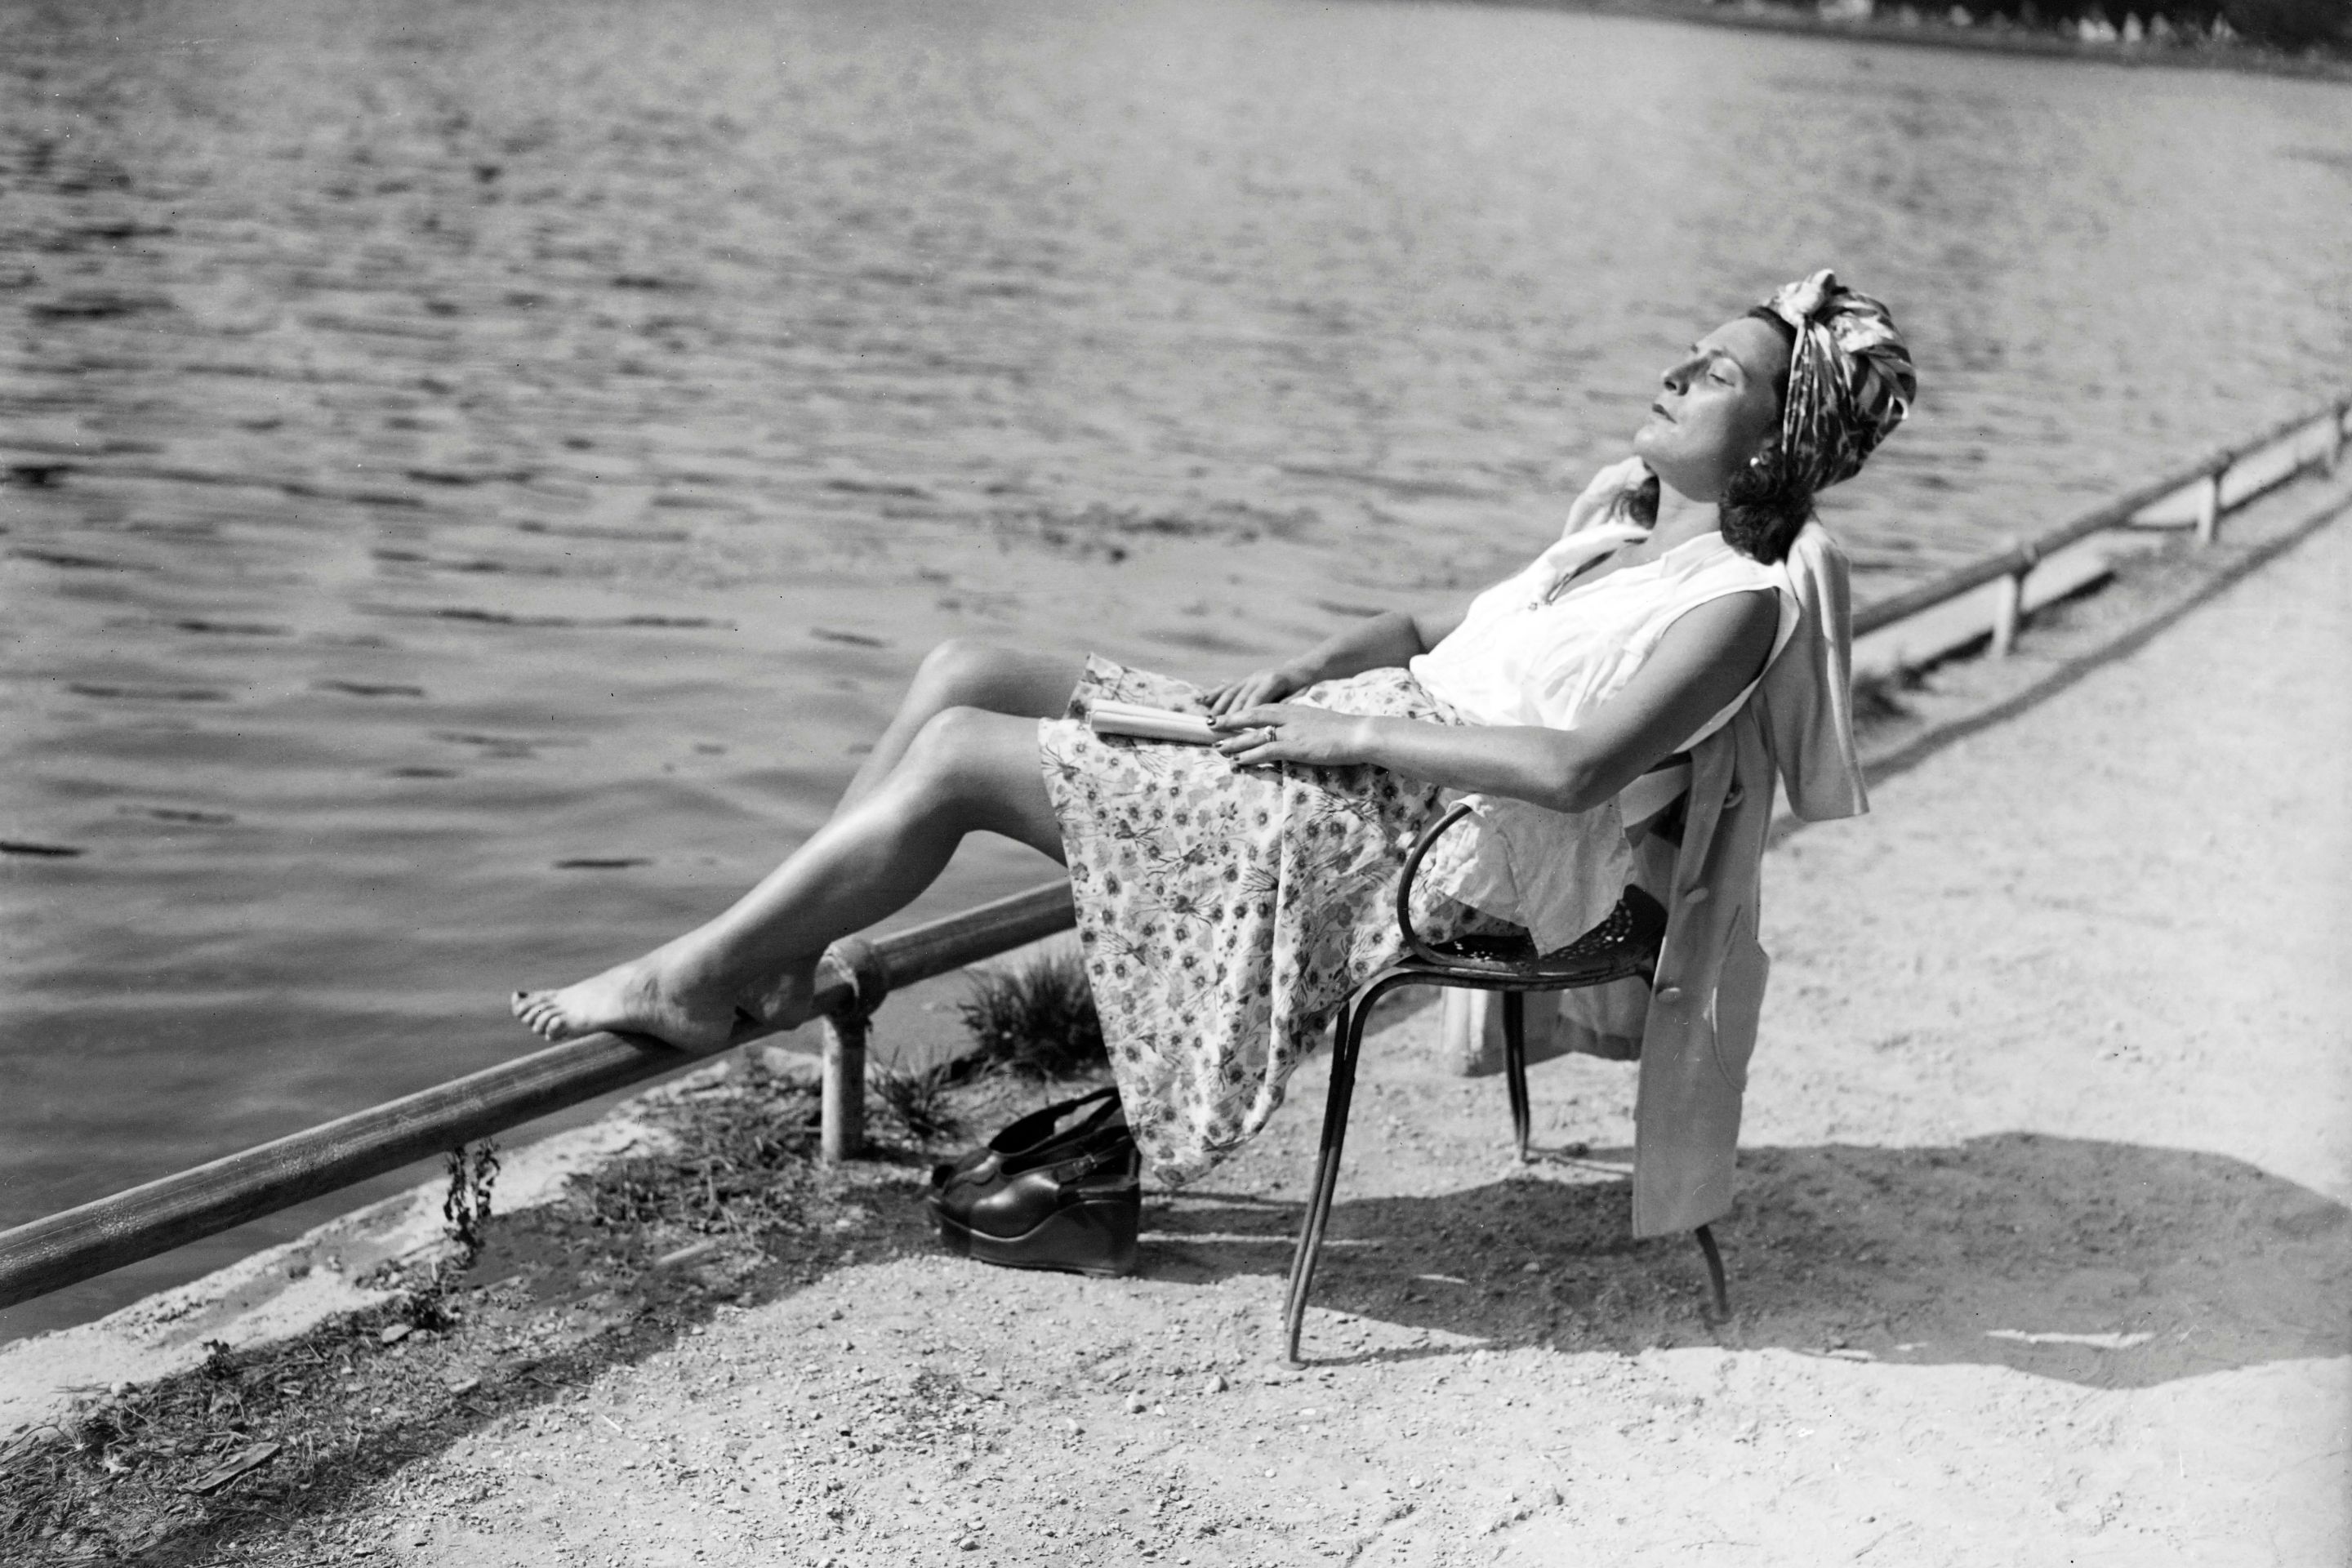 A woman rests and tans near a lake in the Bois de Boulogne near Paris, in June 1946, during a heat wave at the beginning of the 1946 summer.